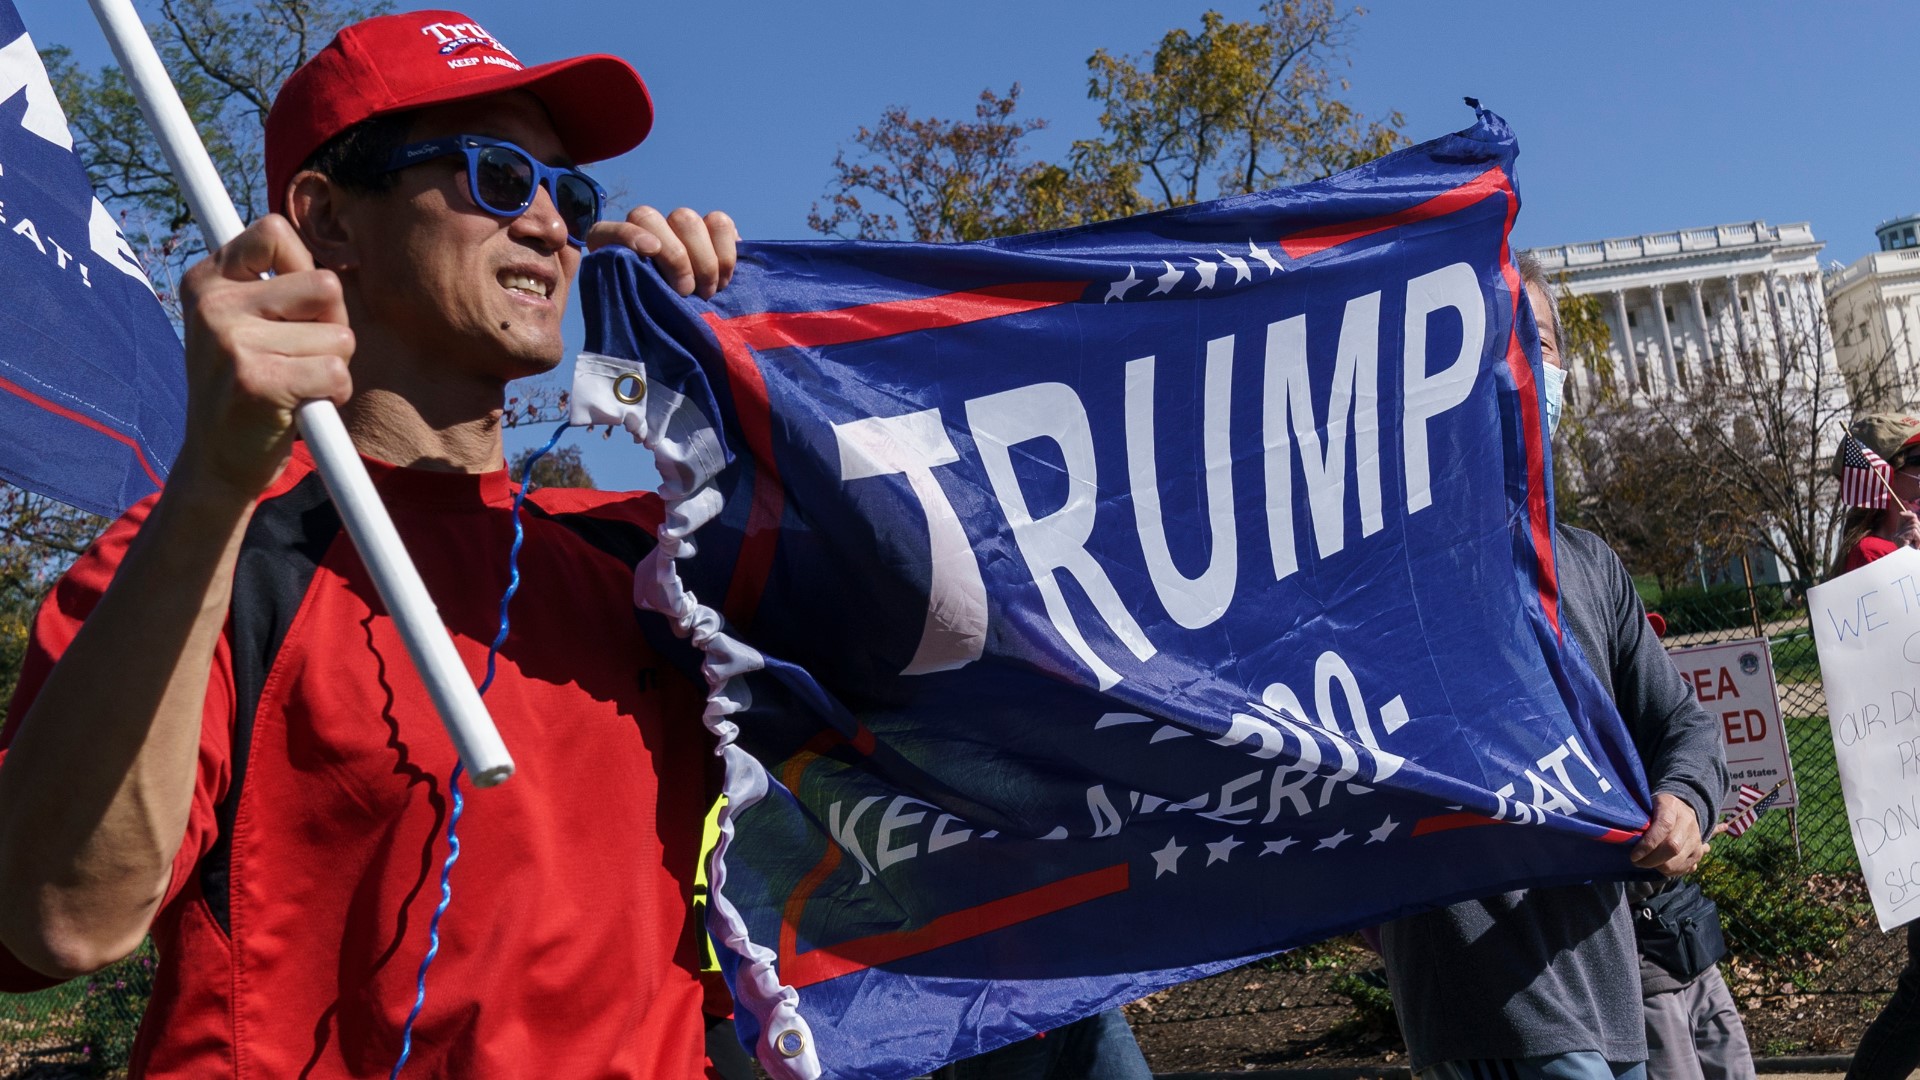 As we wait for the Trump campaign to submit evidence for unfounded claims of widespread voter fraud, supporters of the President are planning rallies in D.C.